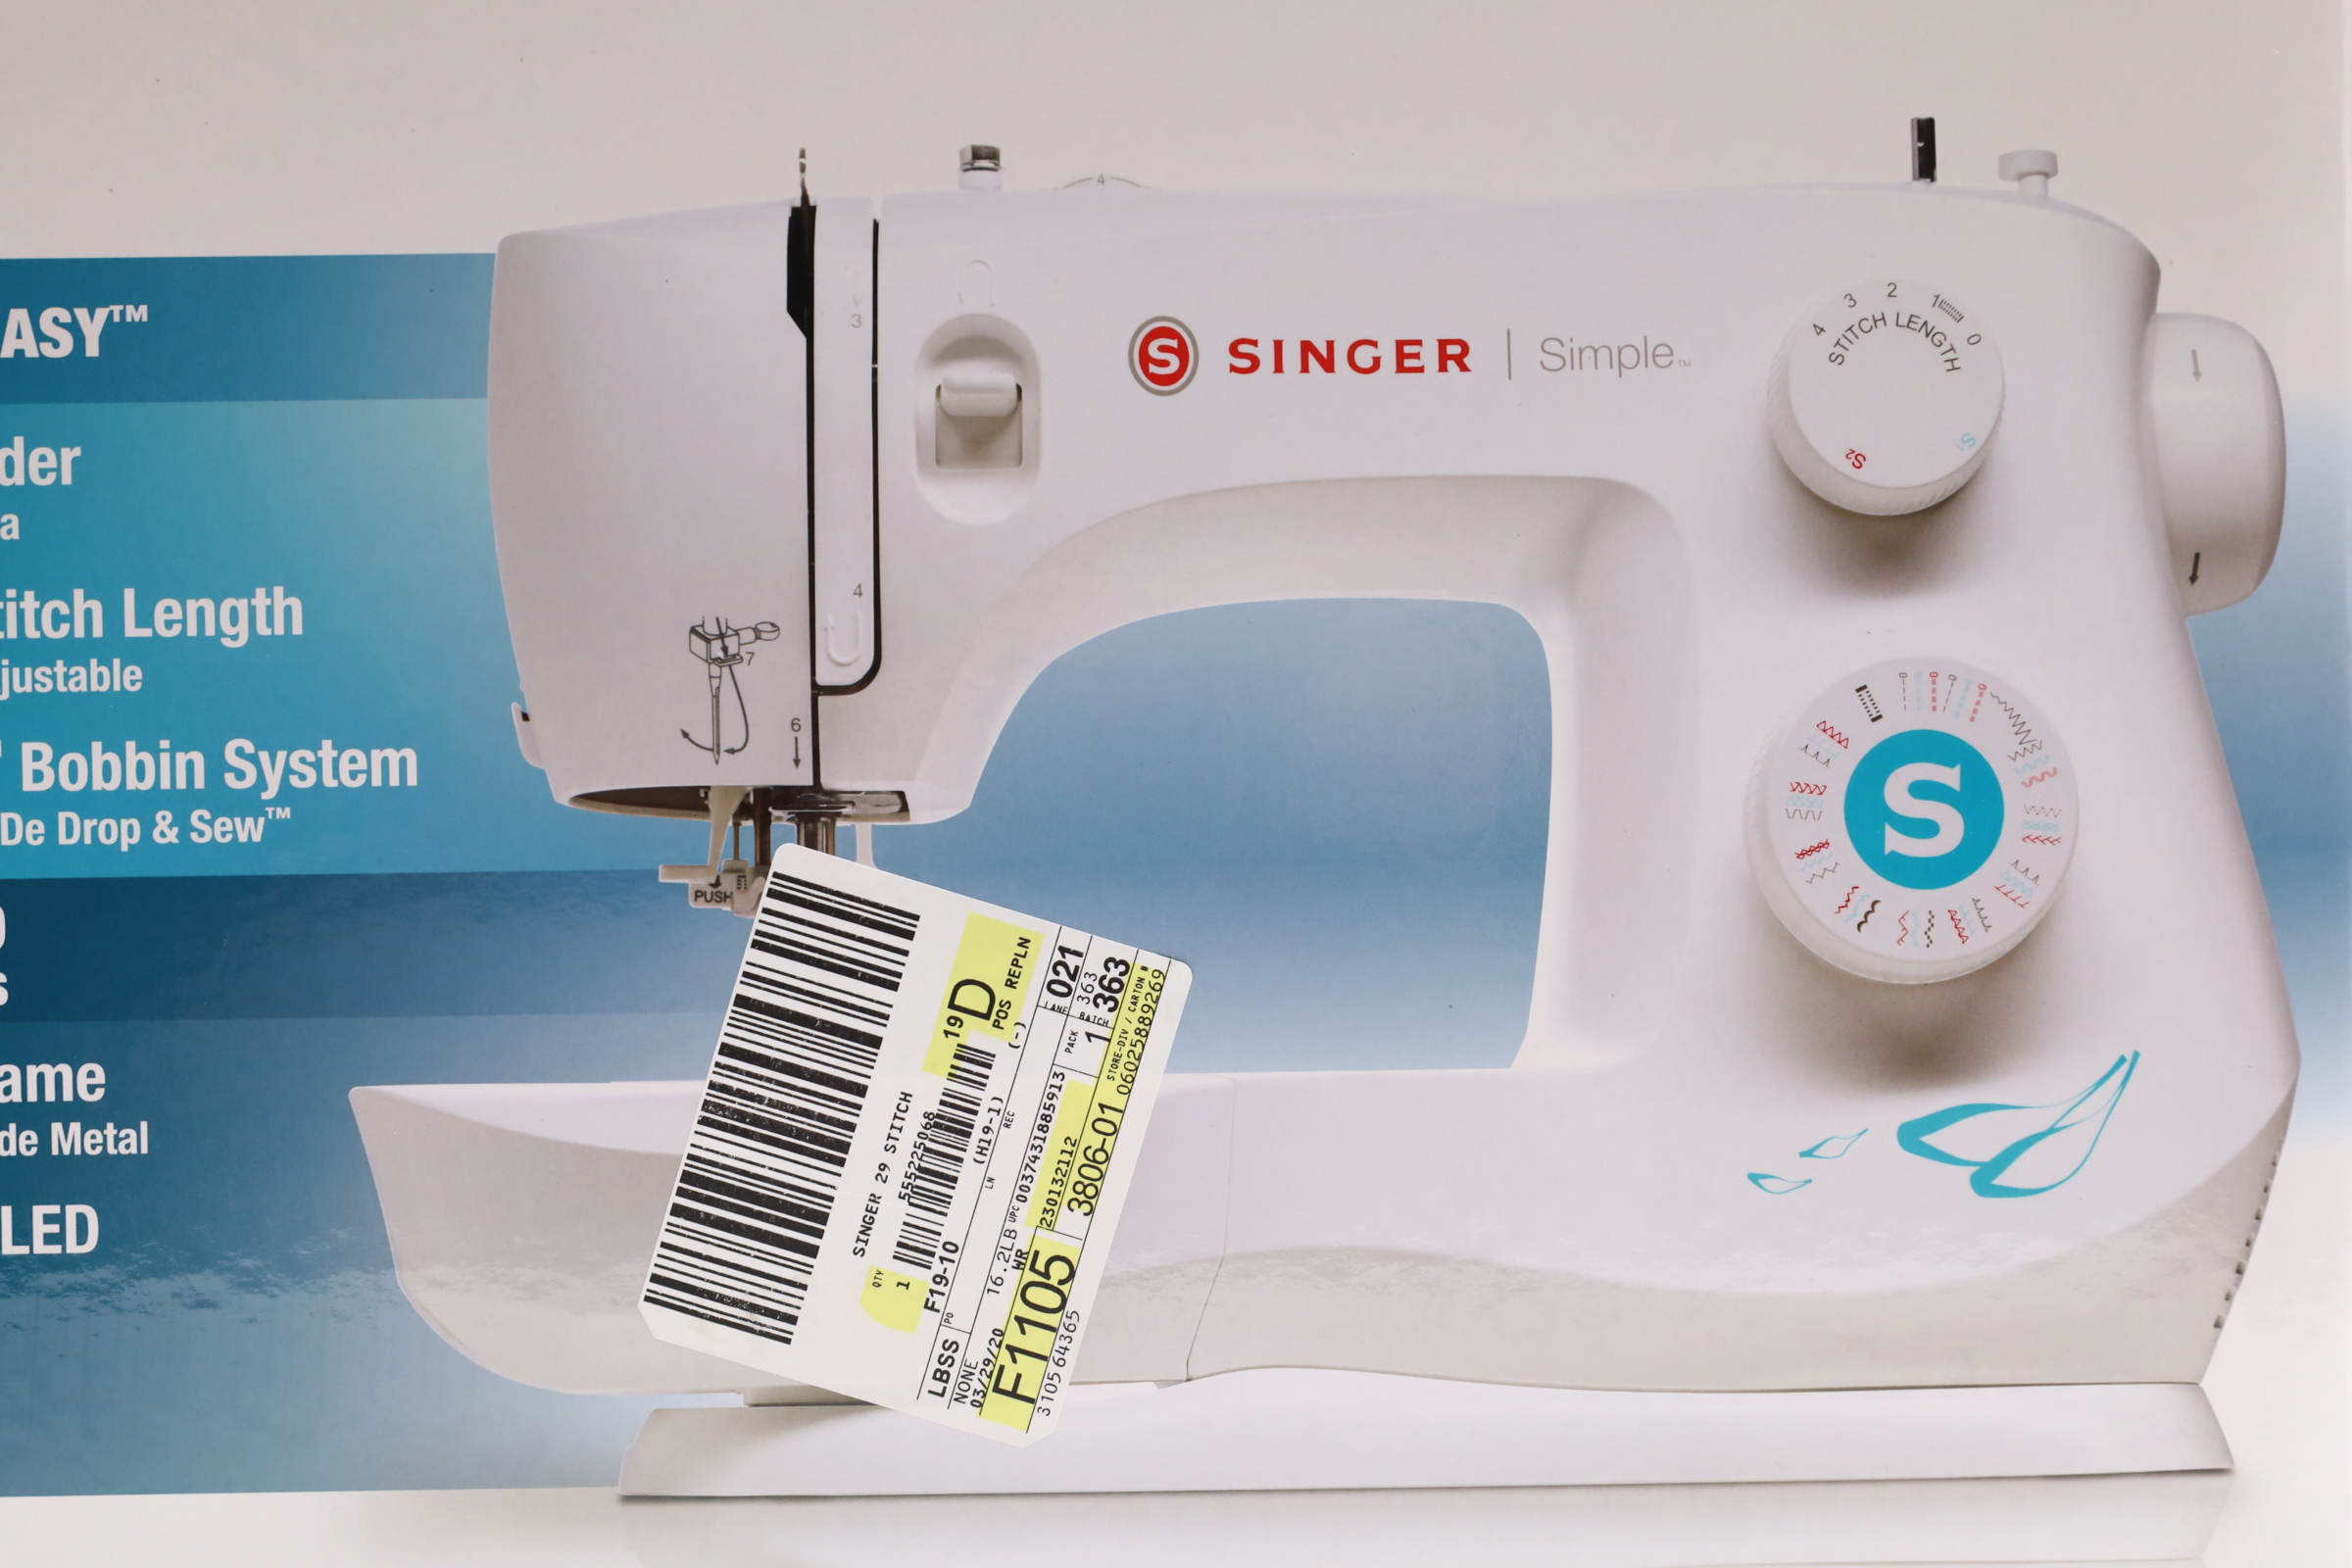 Singer® 3337 Simple™ Mechanical Sewing Machine, White 